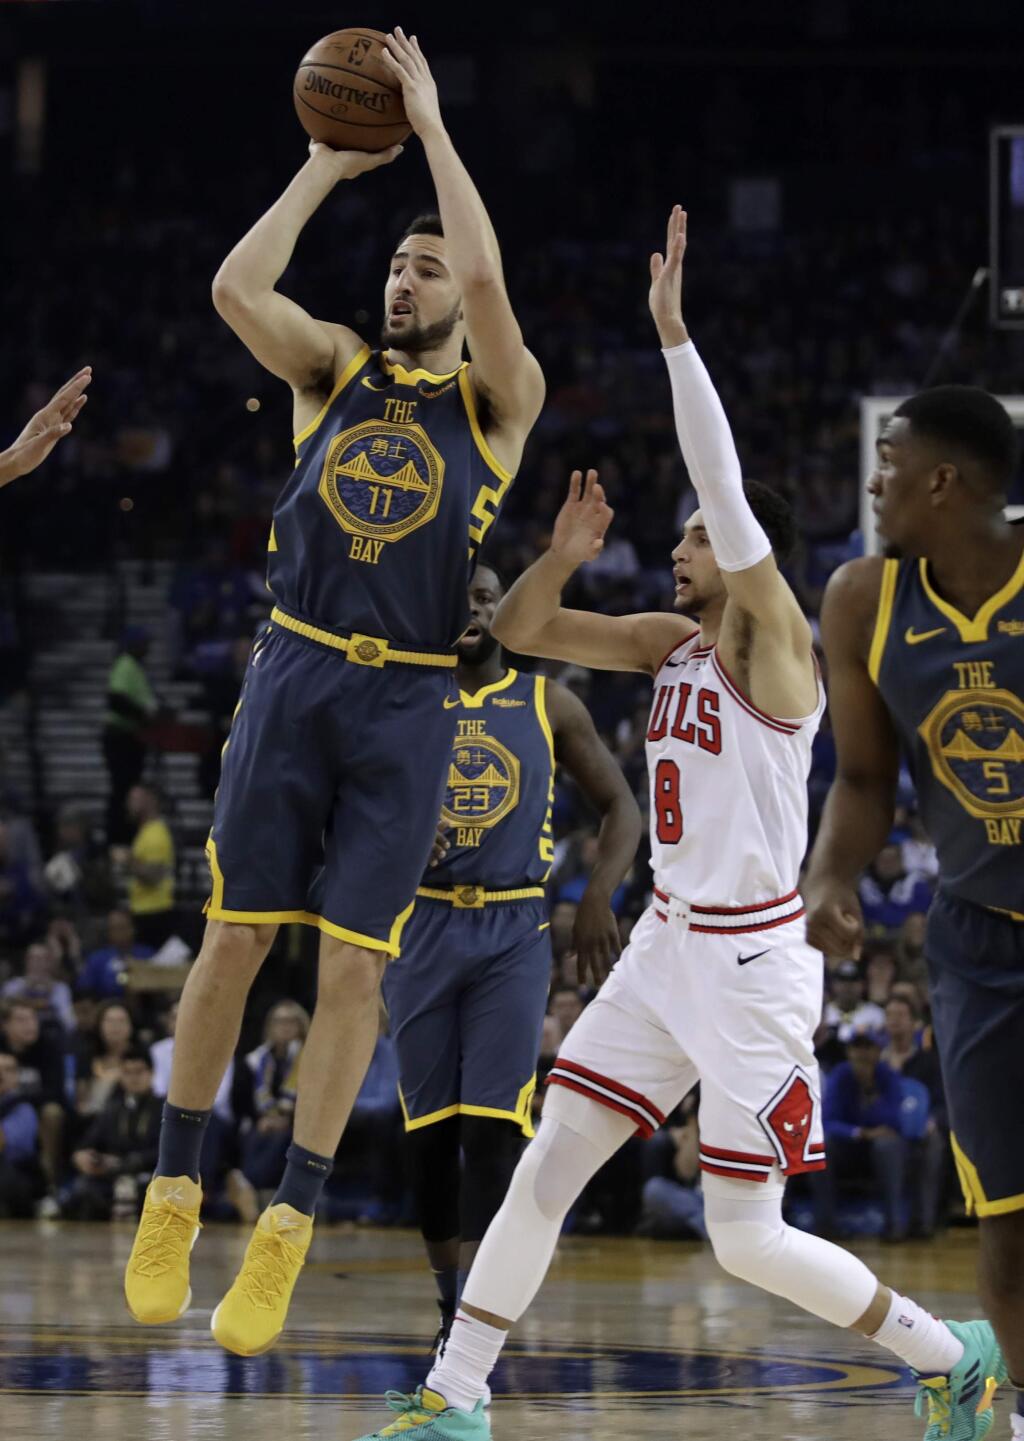 Golden State Warriors' Klay Thompson, left, shoots past Chicago Bulls' Zach LaVine (8) during the first half of an NBA basketball game Friday, Jan. 11, 2019, in Oakland, Calif. (AP Photo/Ben Margot)